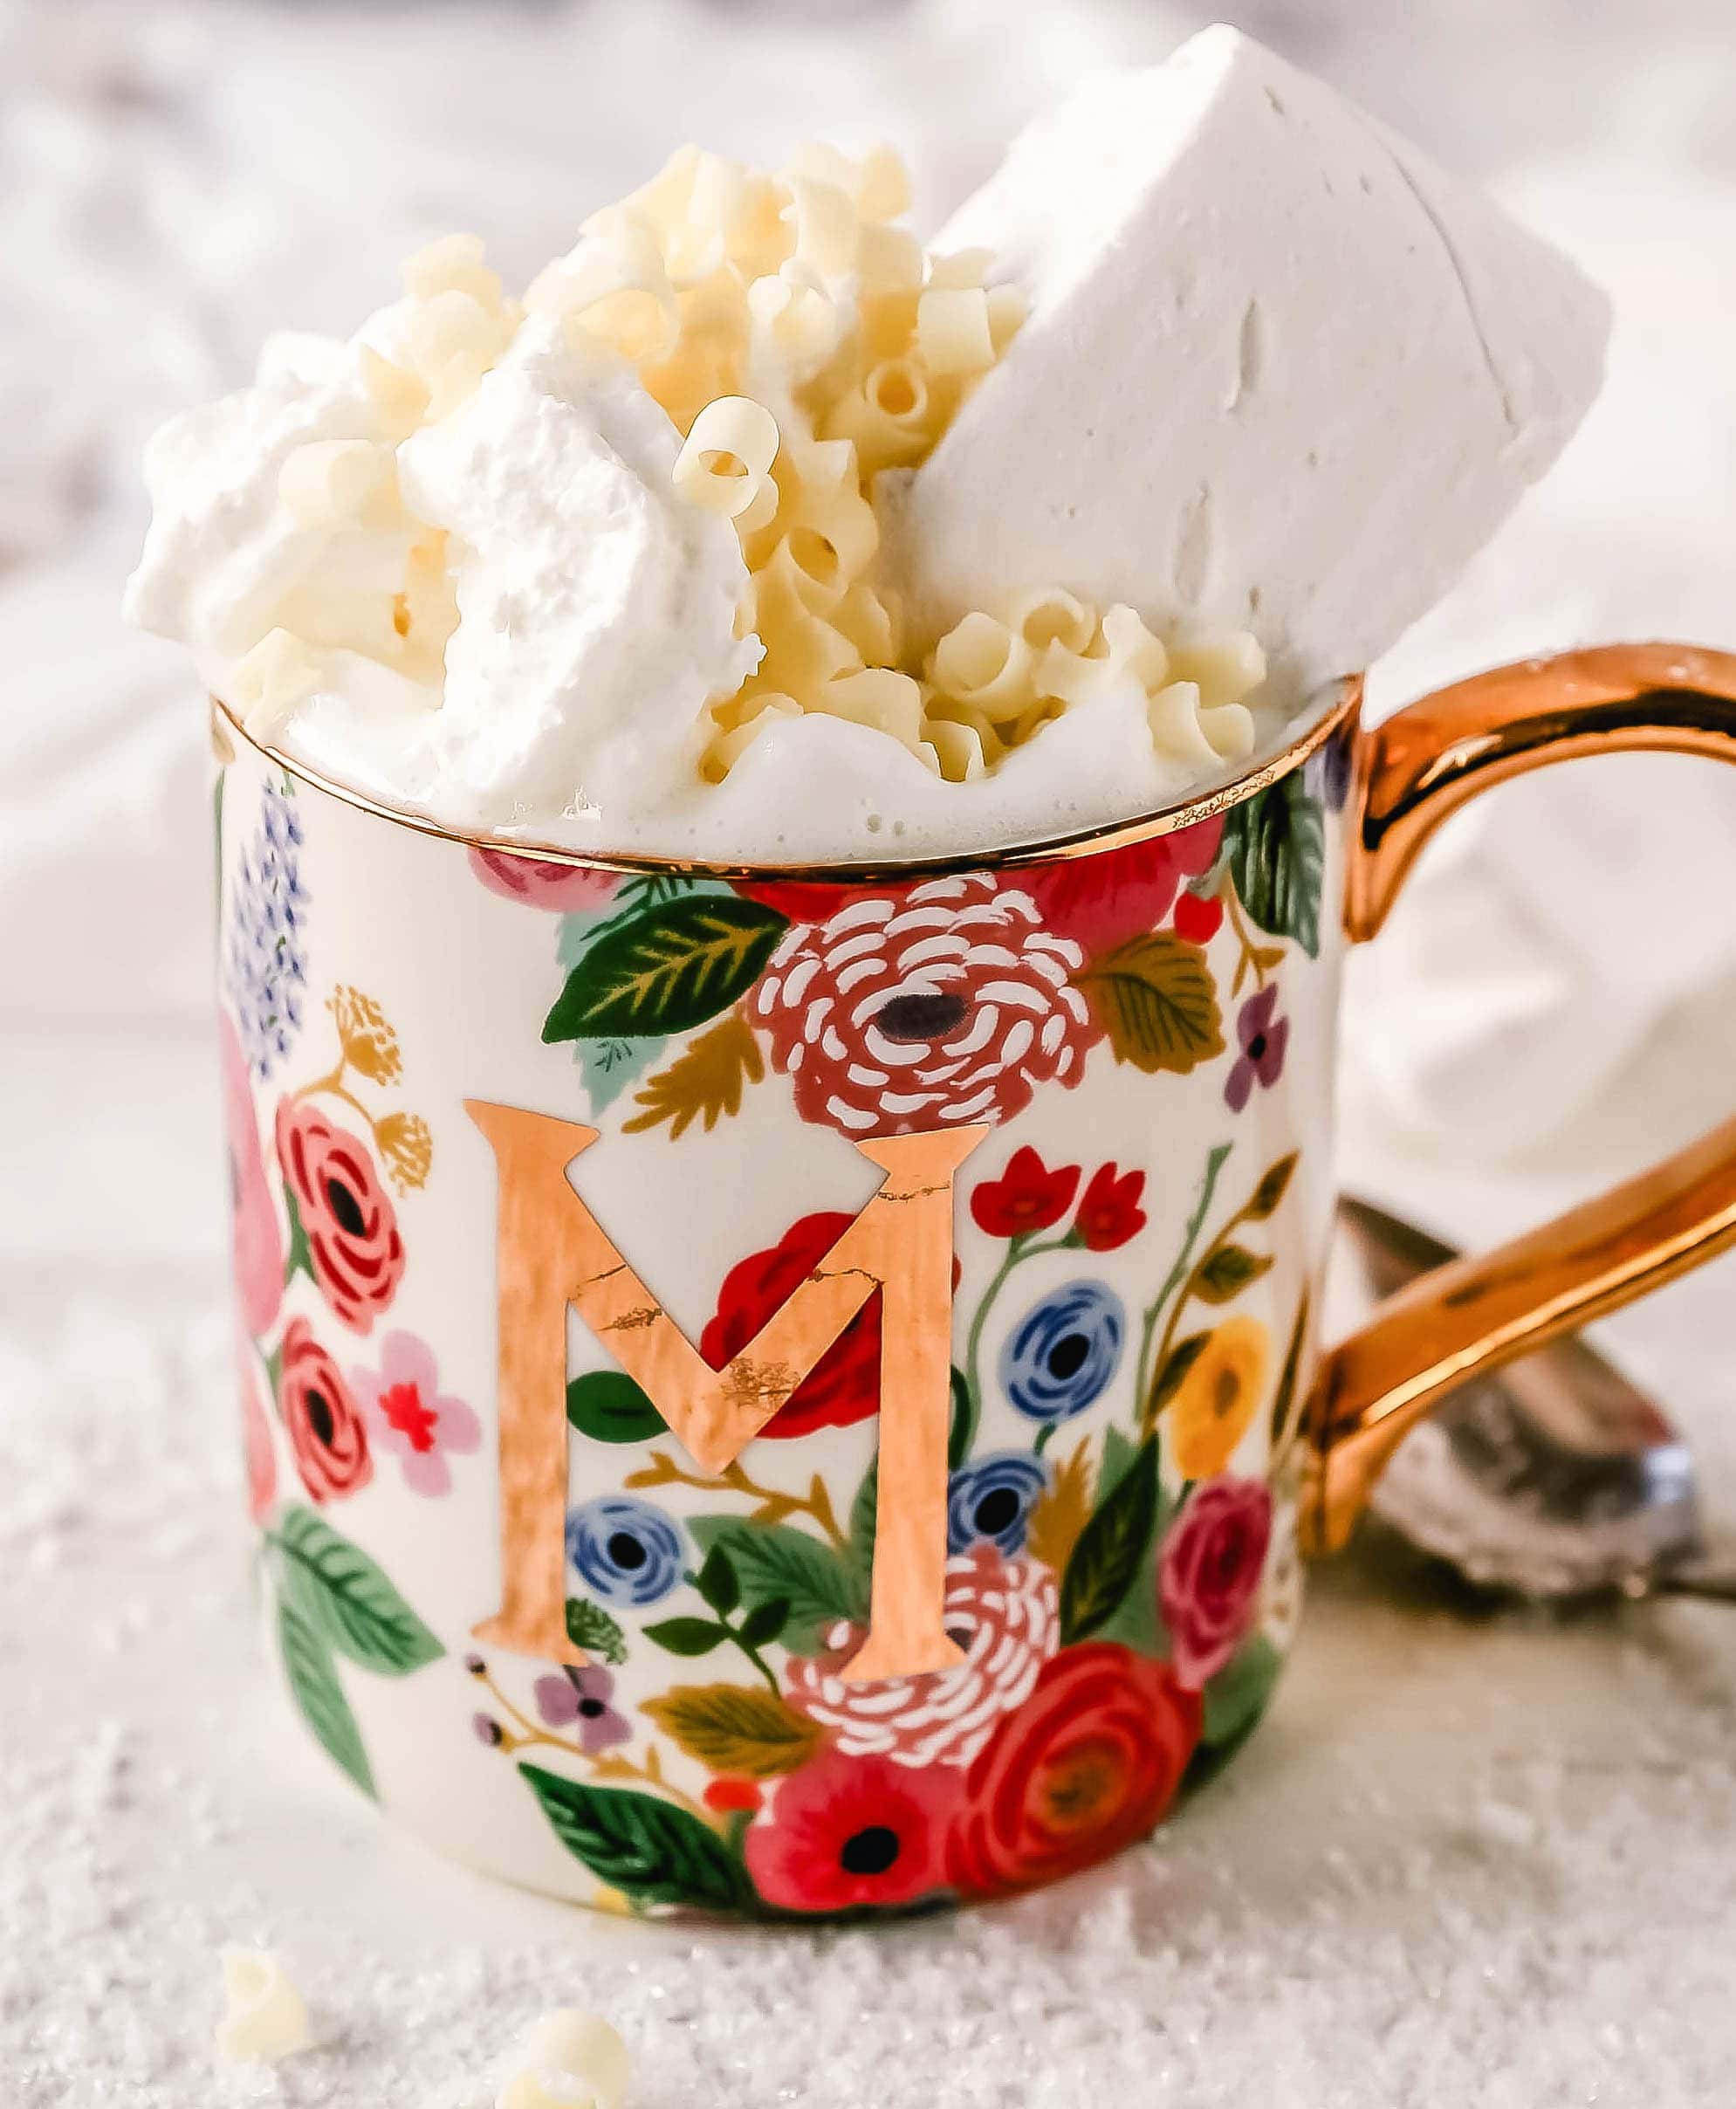 hot cocoa with marshmallows and whipped cream